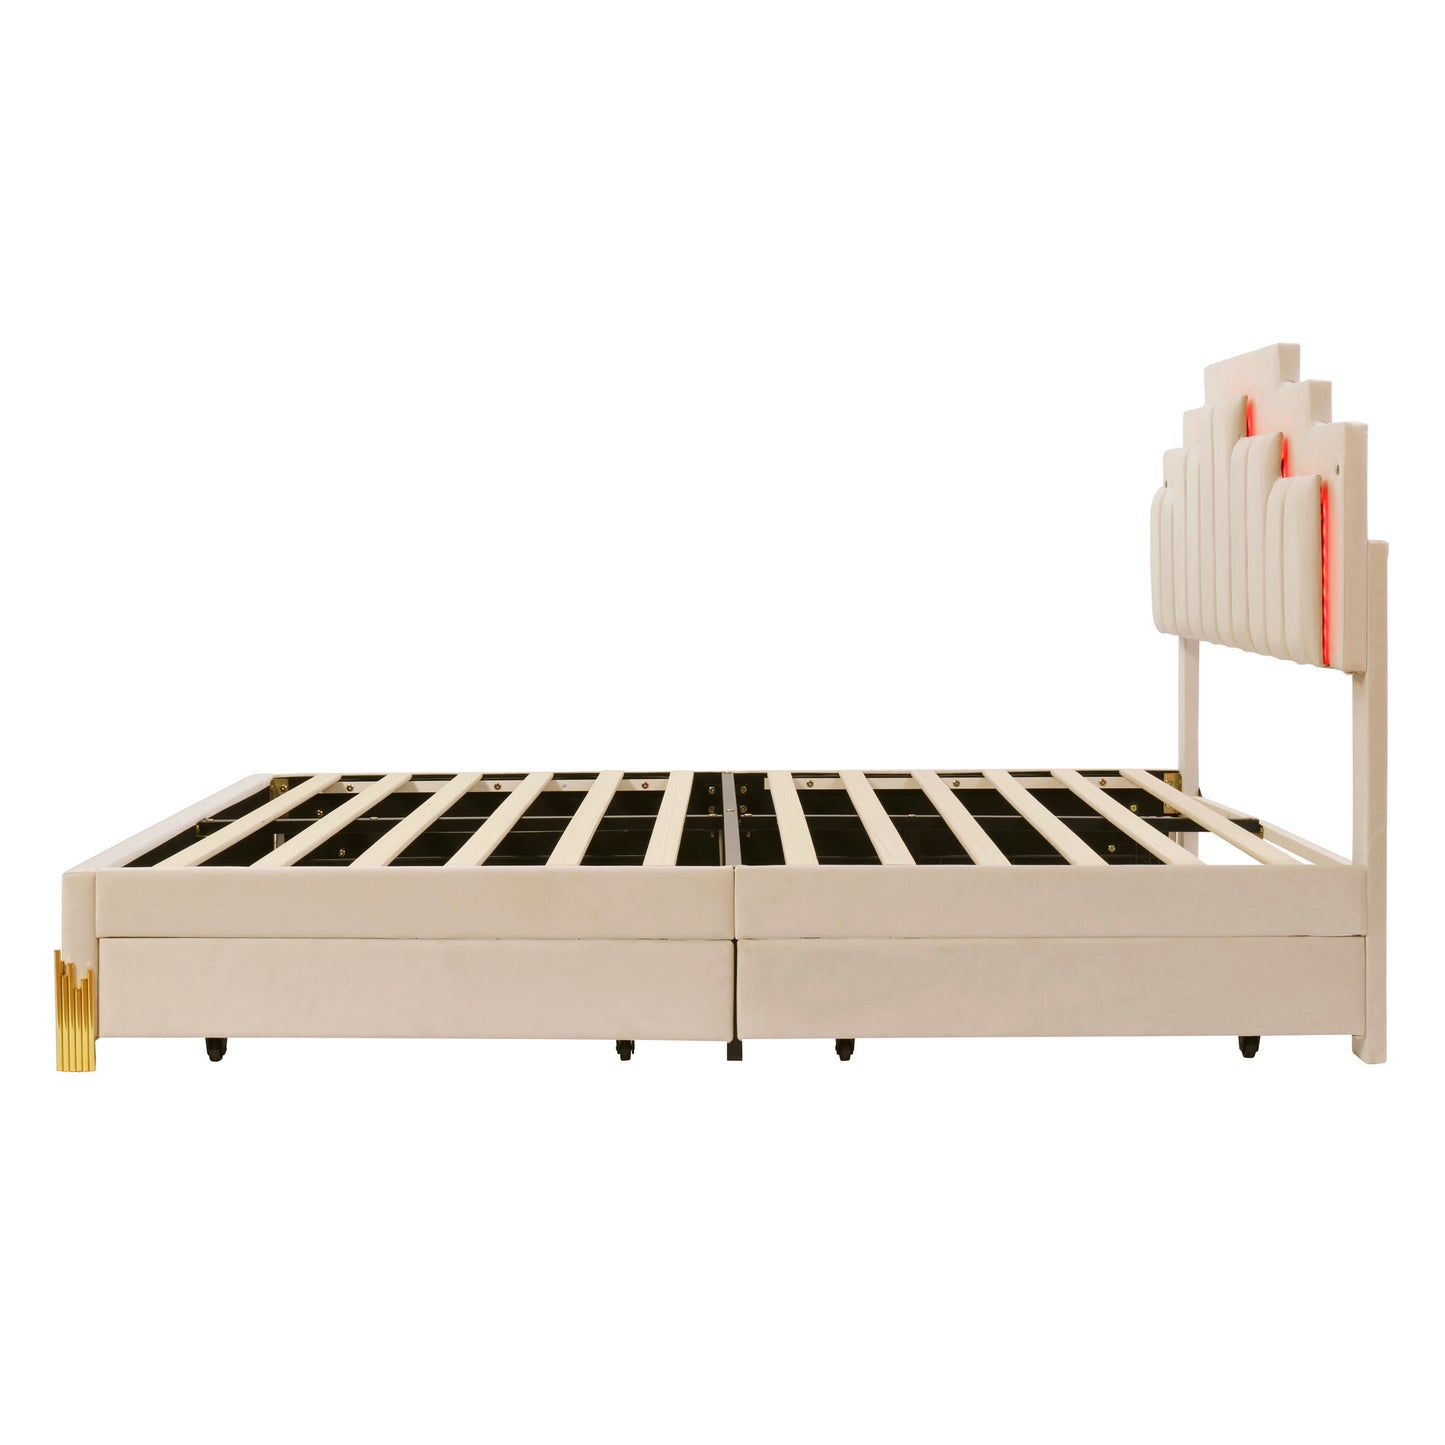 Queen Size Upholstered Platform Bed with LED Lights and 4 Drawers, Stylish Irregular Metal Bed Legs Design, Beige